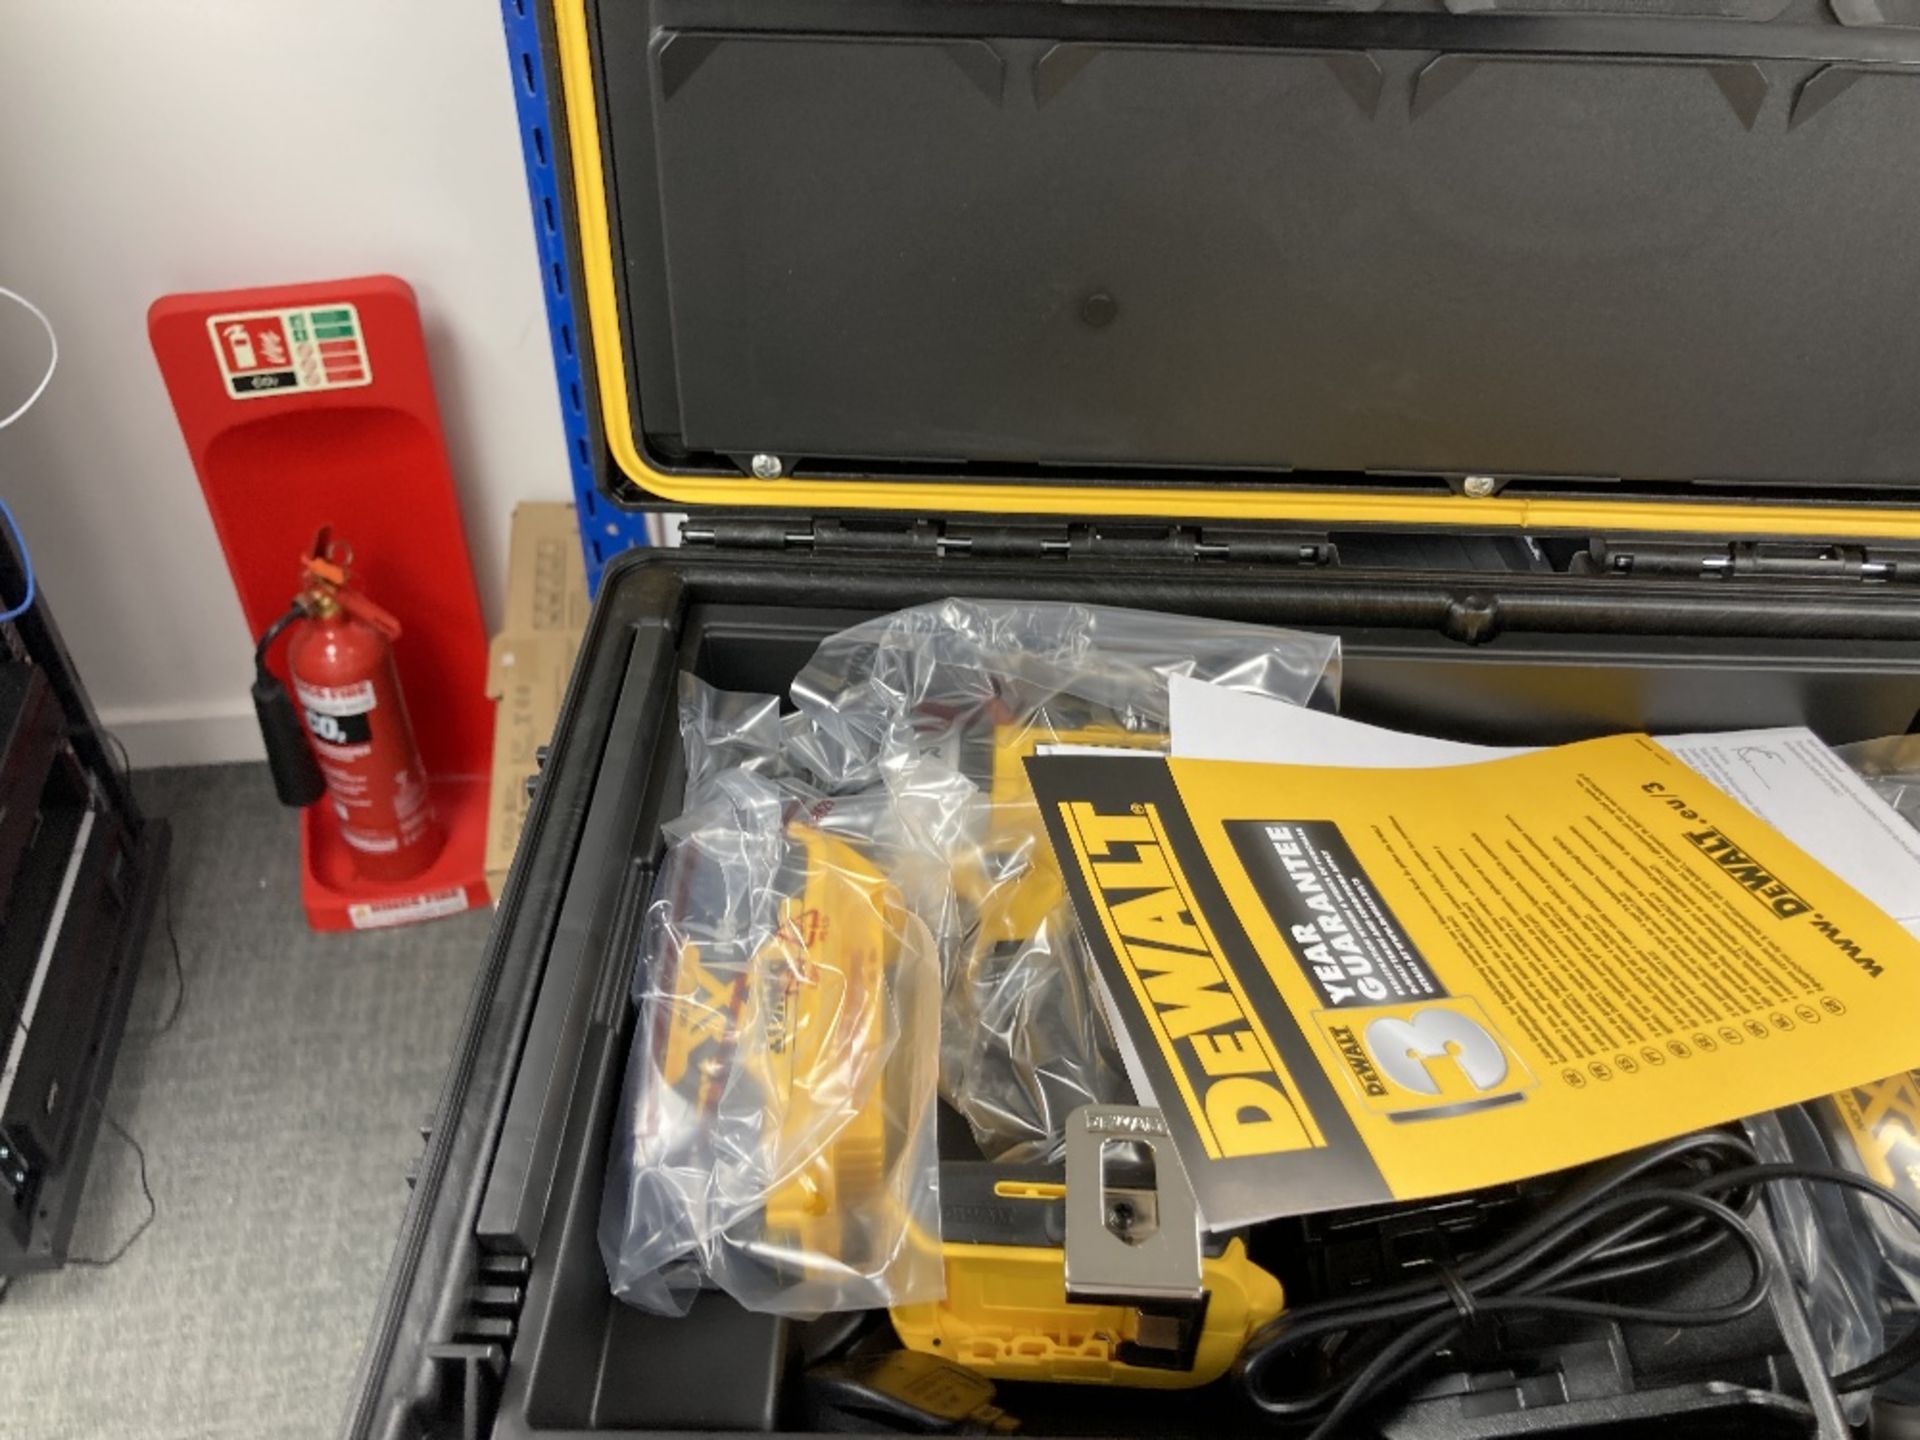 DeWalt DCK266P2-GB 18V XR Brushless Combi Drill & Impact Driver Twin Kit with 2x 5.0Ah Batteries - Image 2 of 7